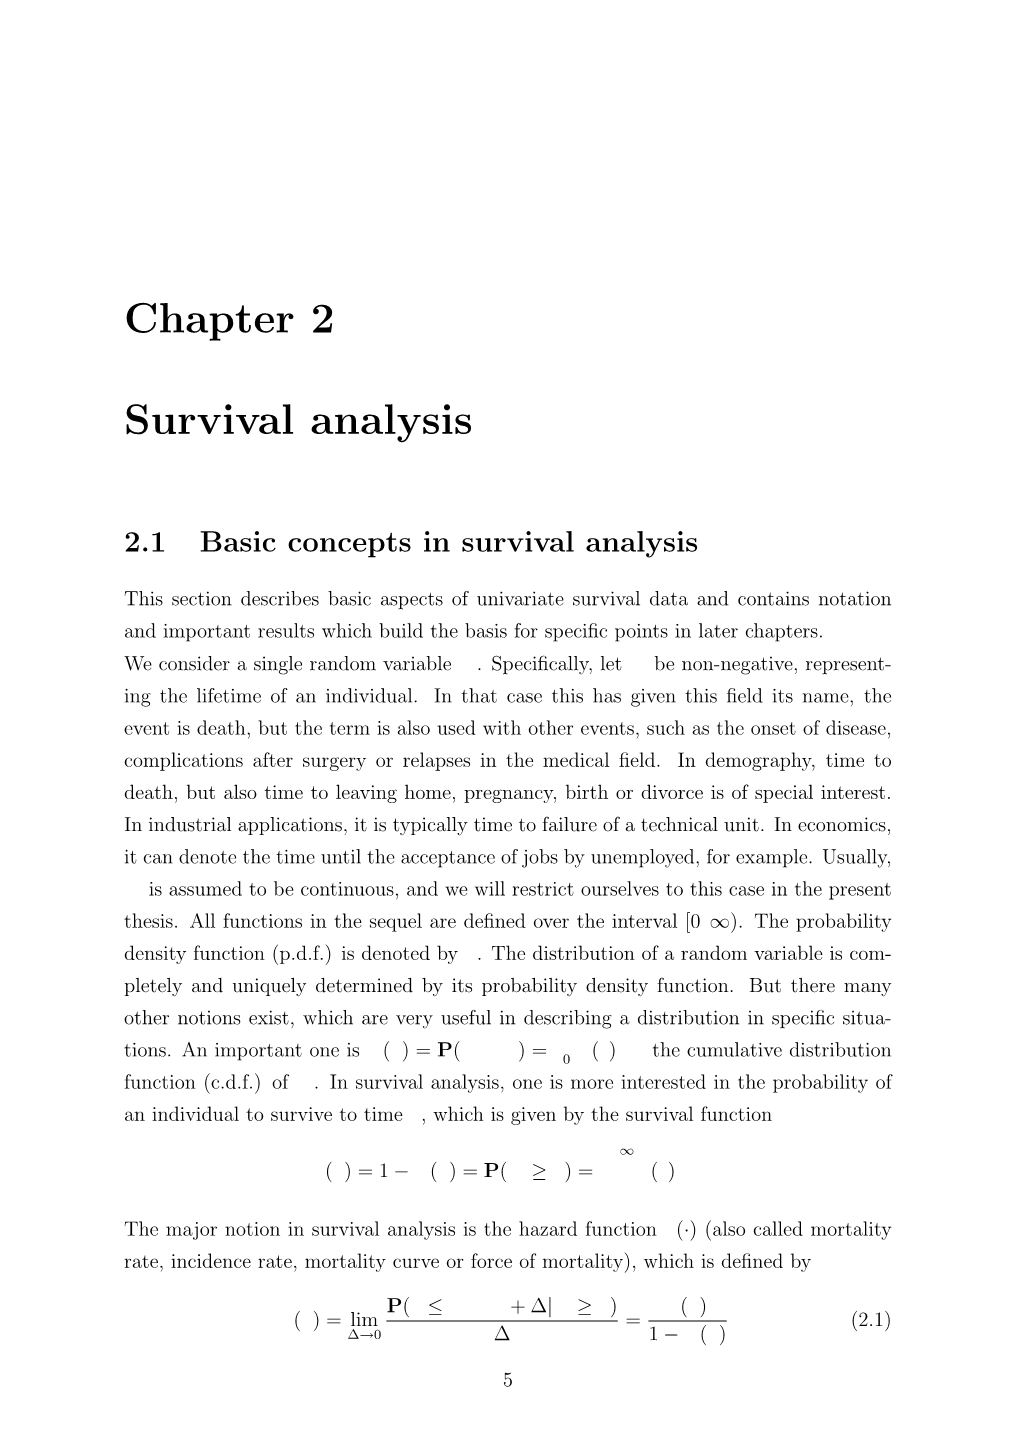 Chapter 2 Survival Analysis